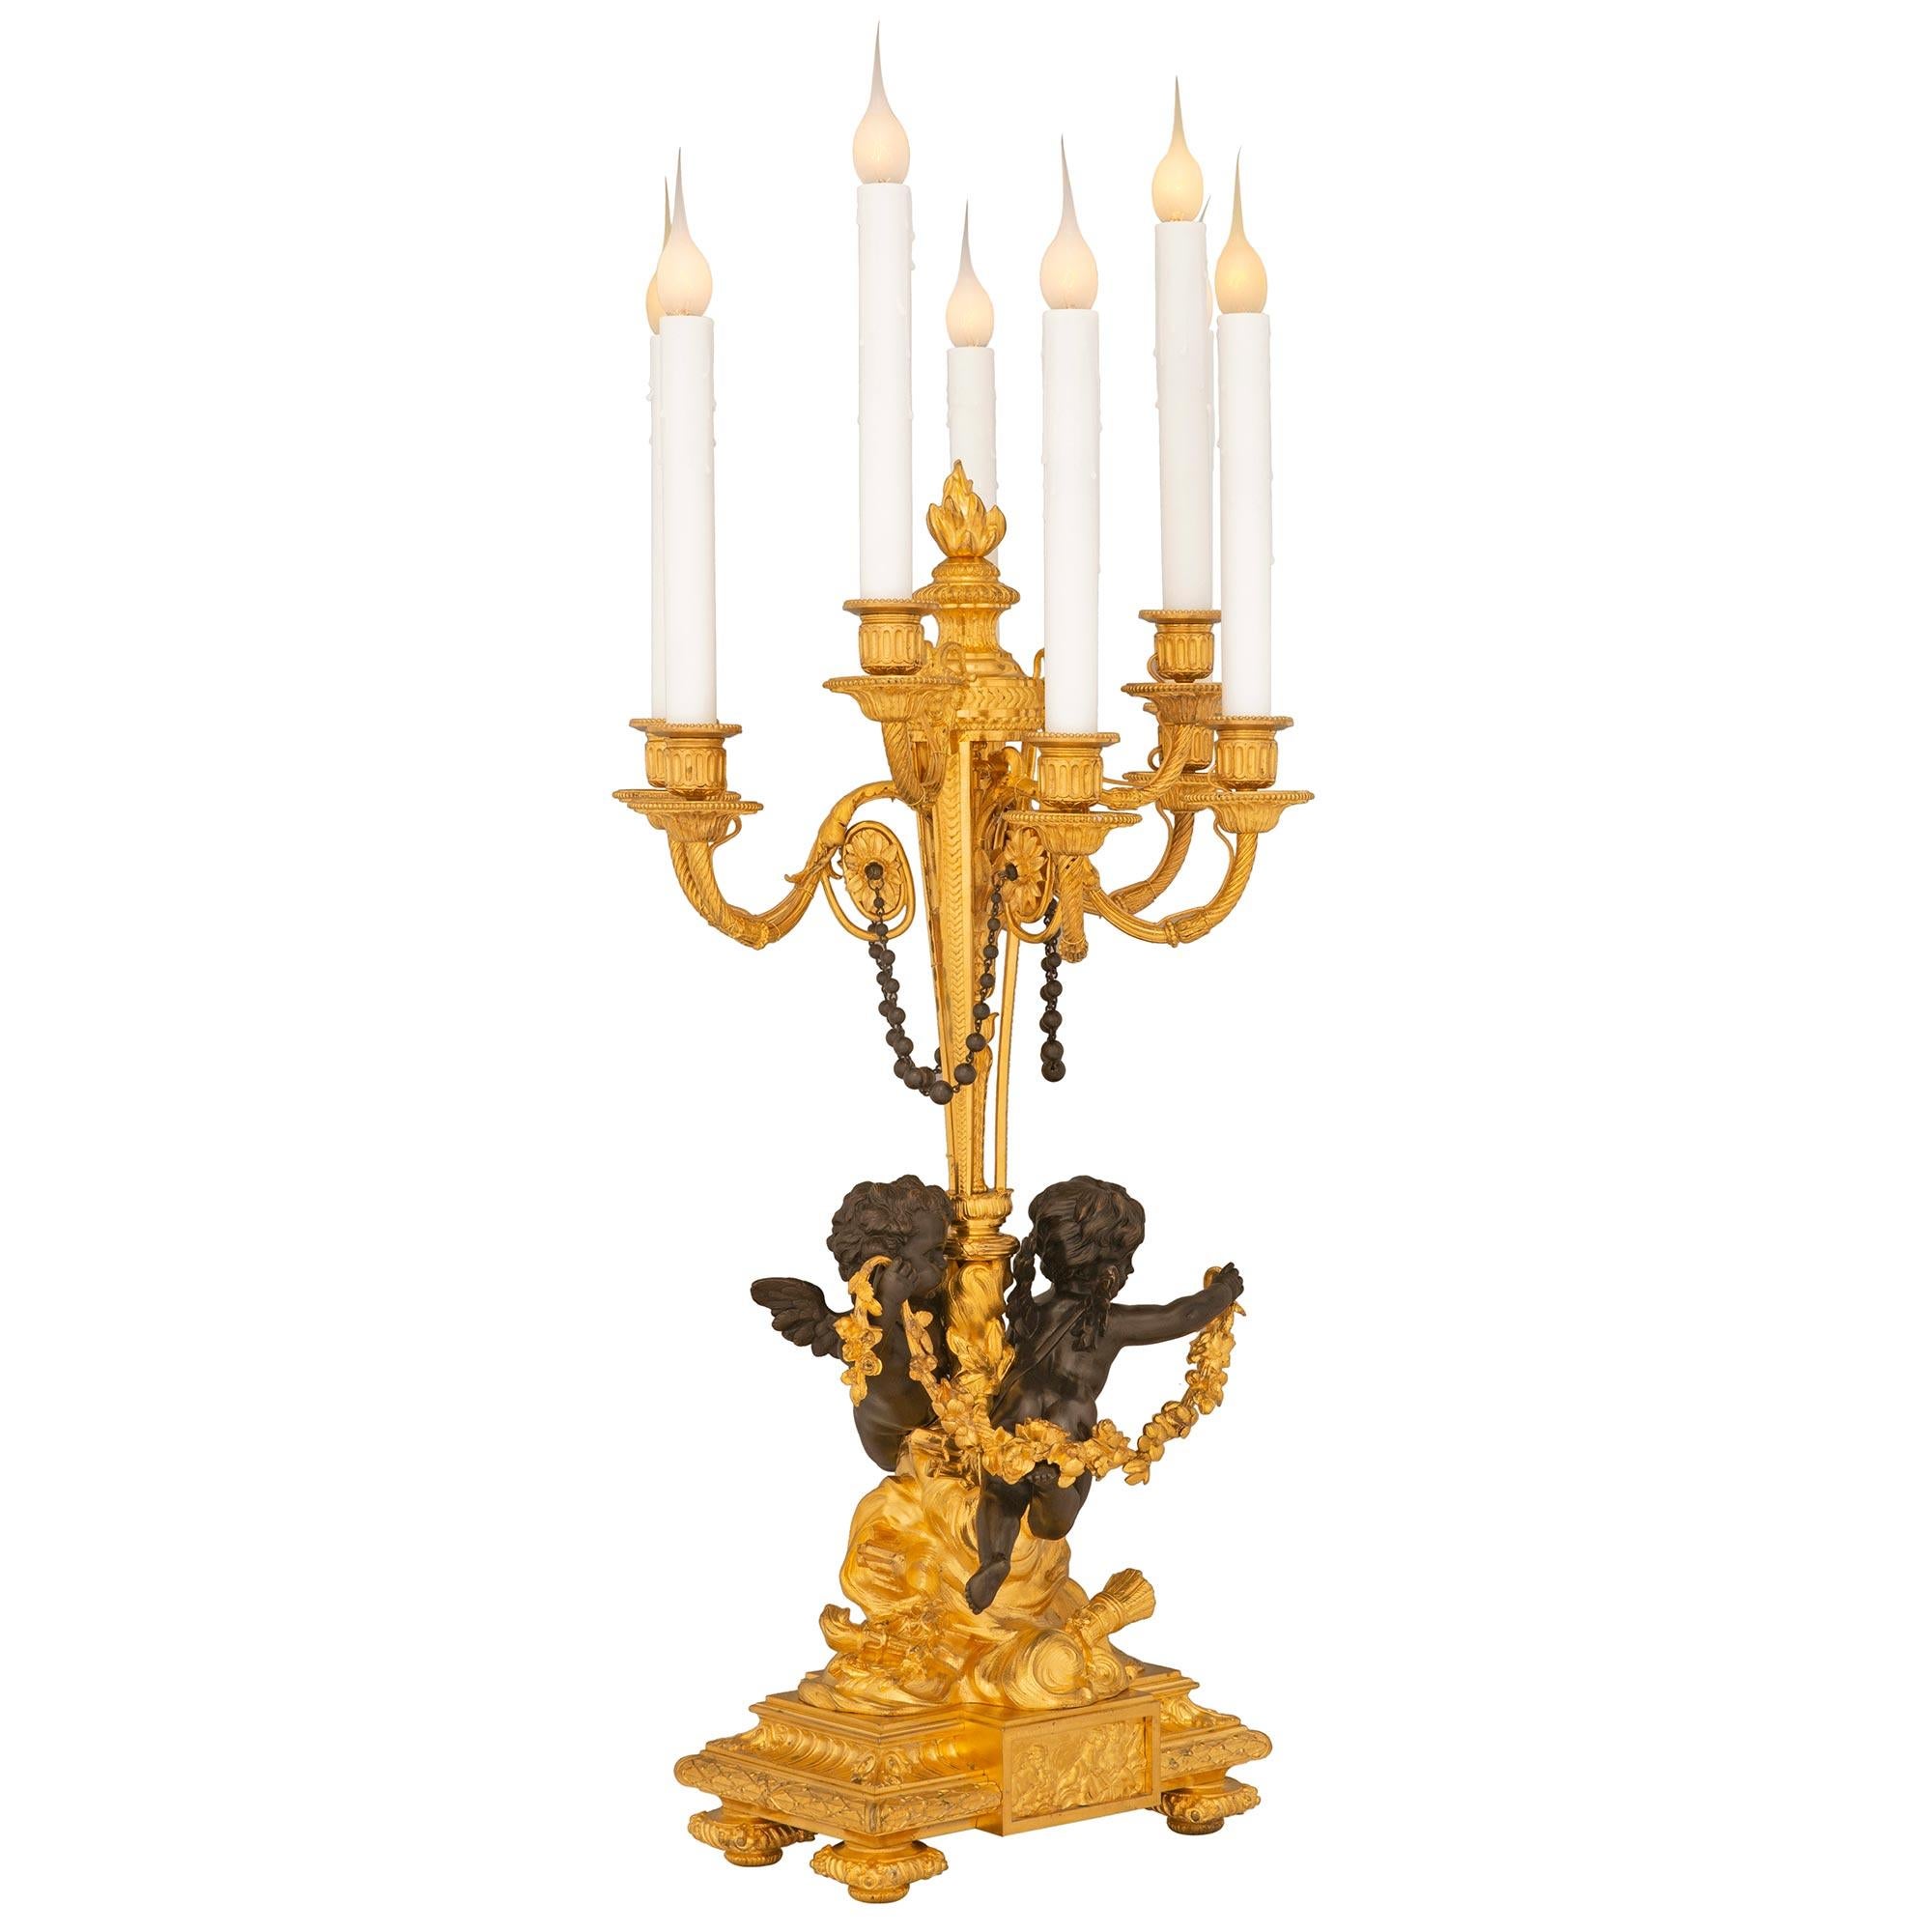 A stunning and extremely high quality true pair of French 19th century Louis XVI st. Belle Époque period patinated bronze and ormolu candelabra lamps possibly by Henri Picard. Each eight arm lamp is raised by fine mottled foliate feet below a